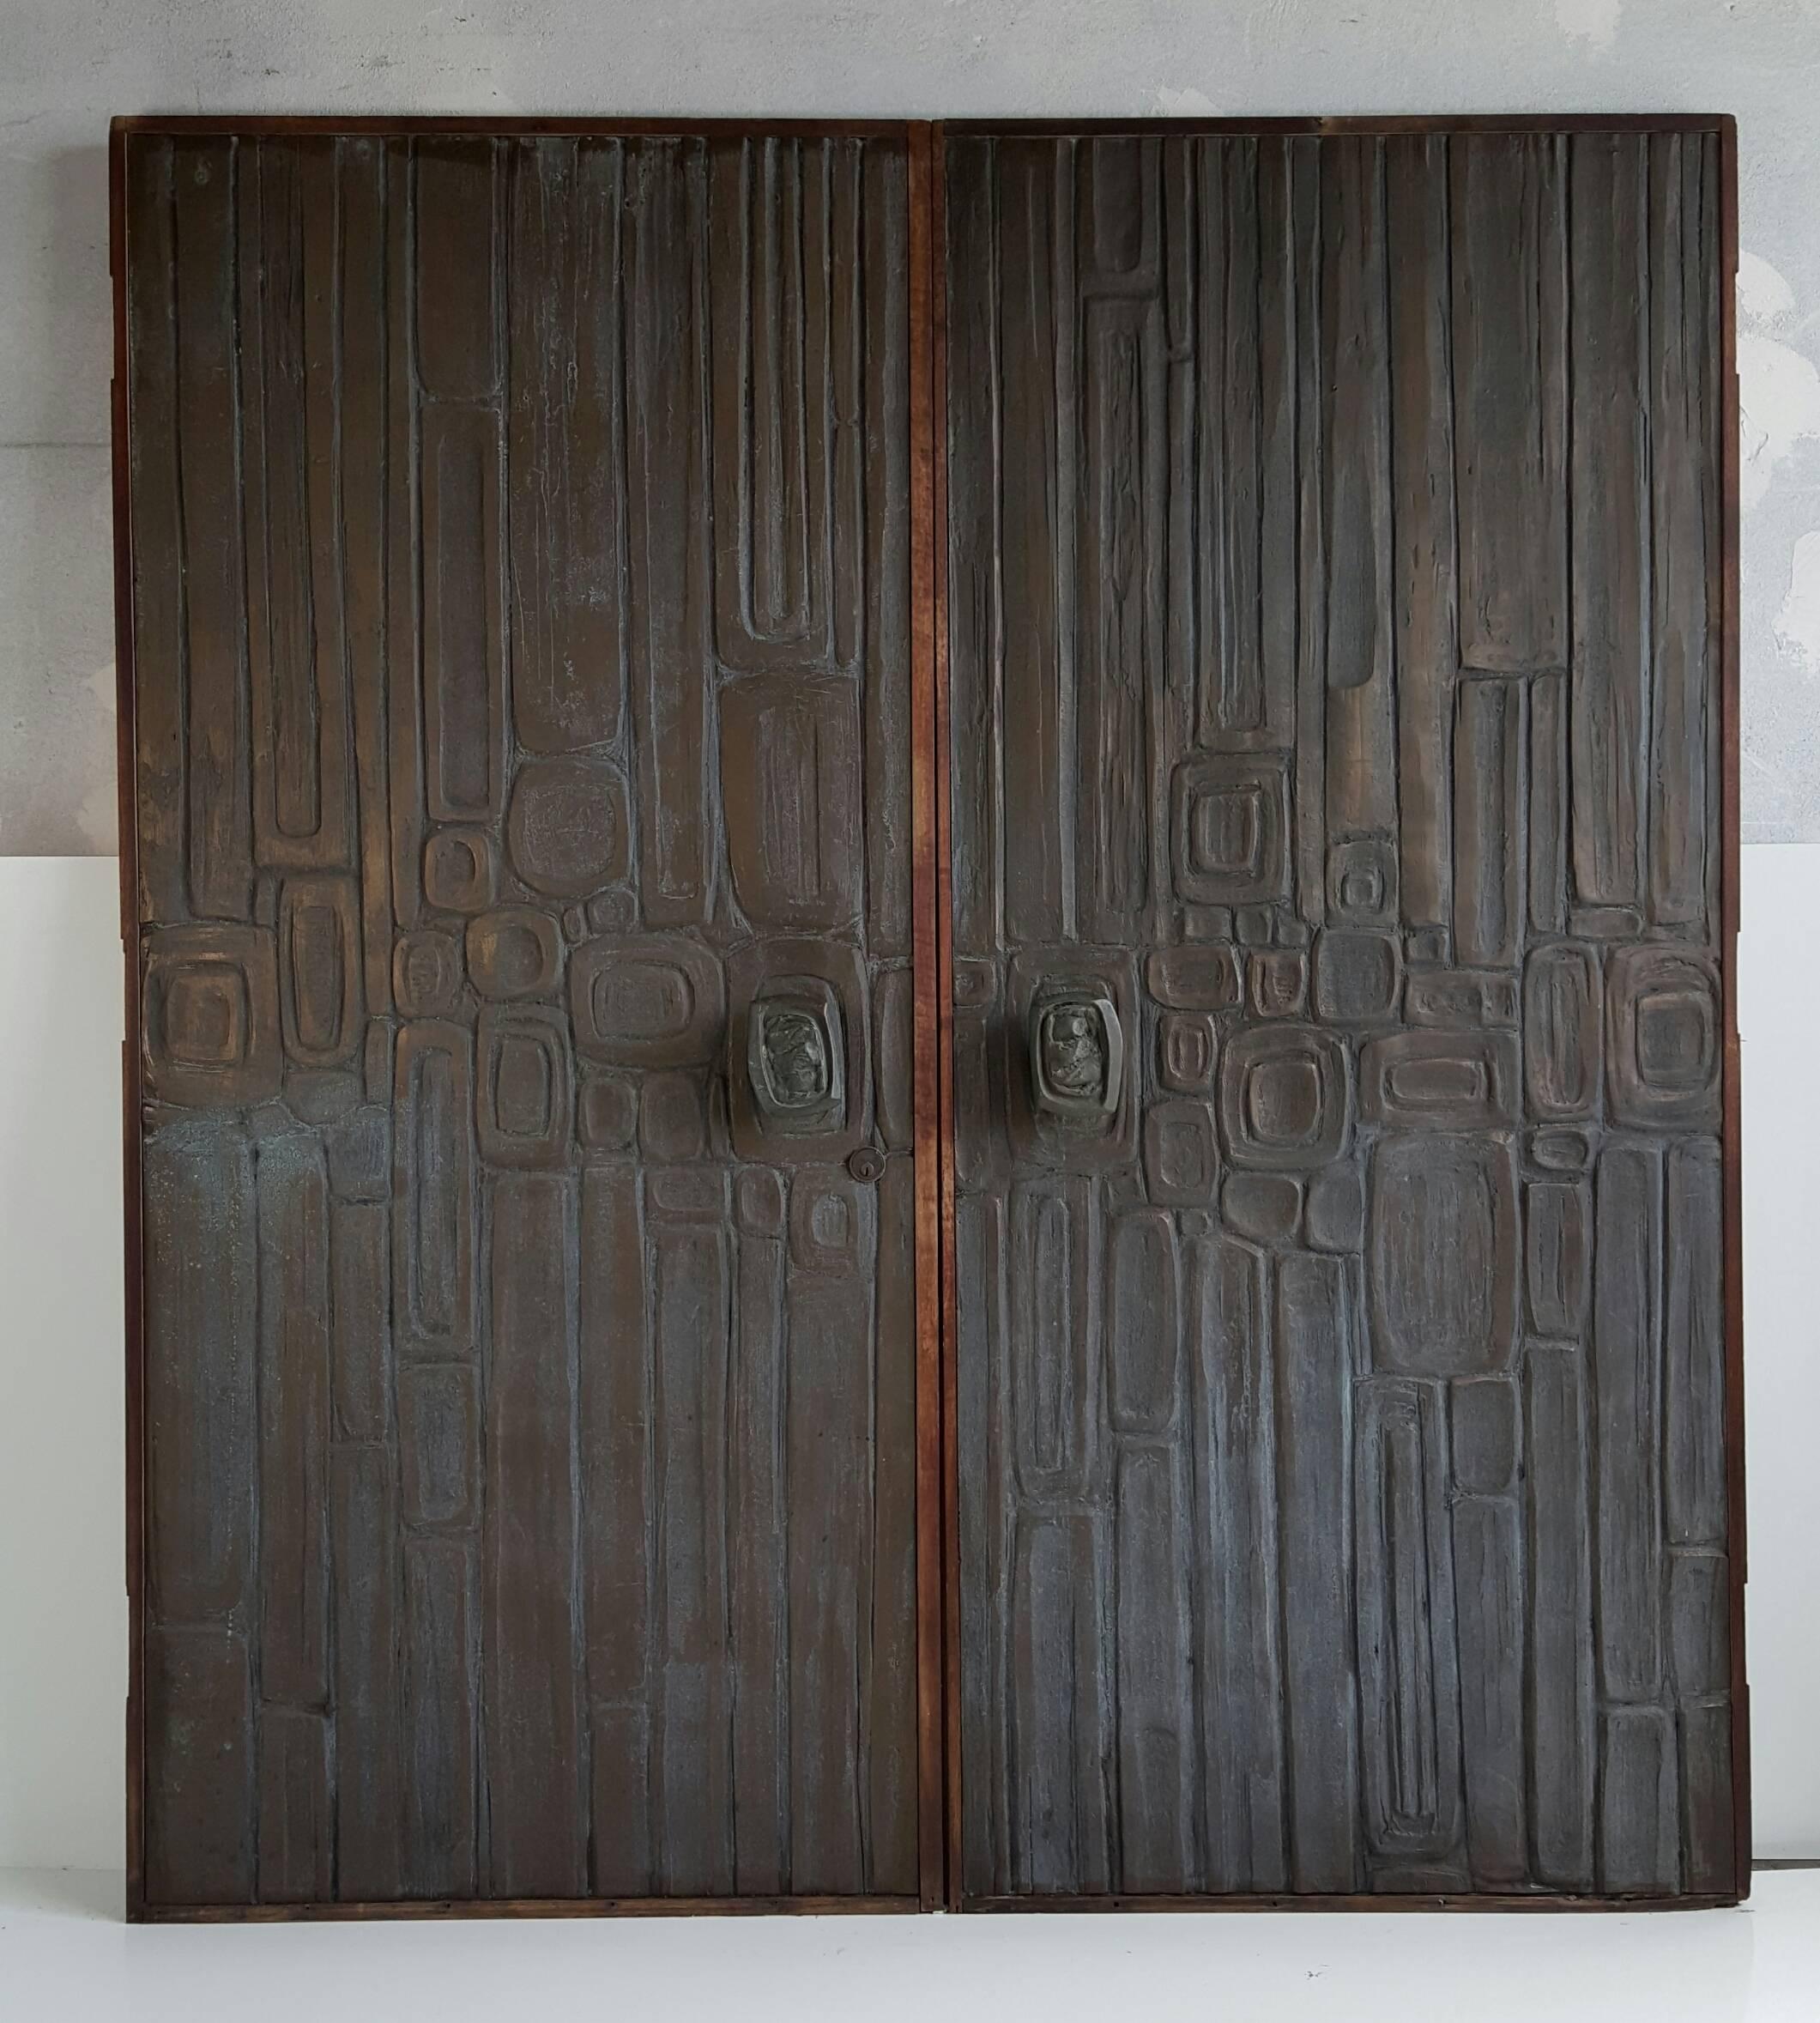 Rare Pair of Bonded Bronze Doors, Style of Forms and Surfaces, Brutalist Design 1